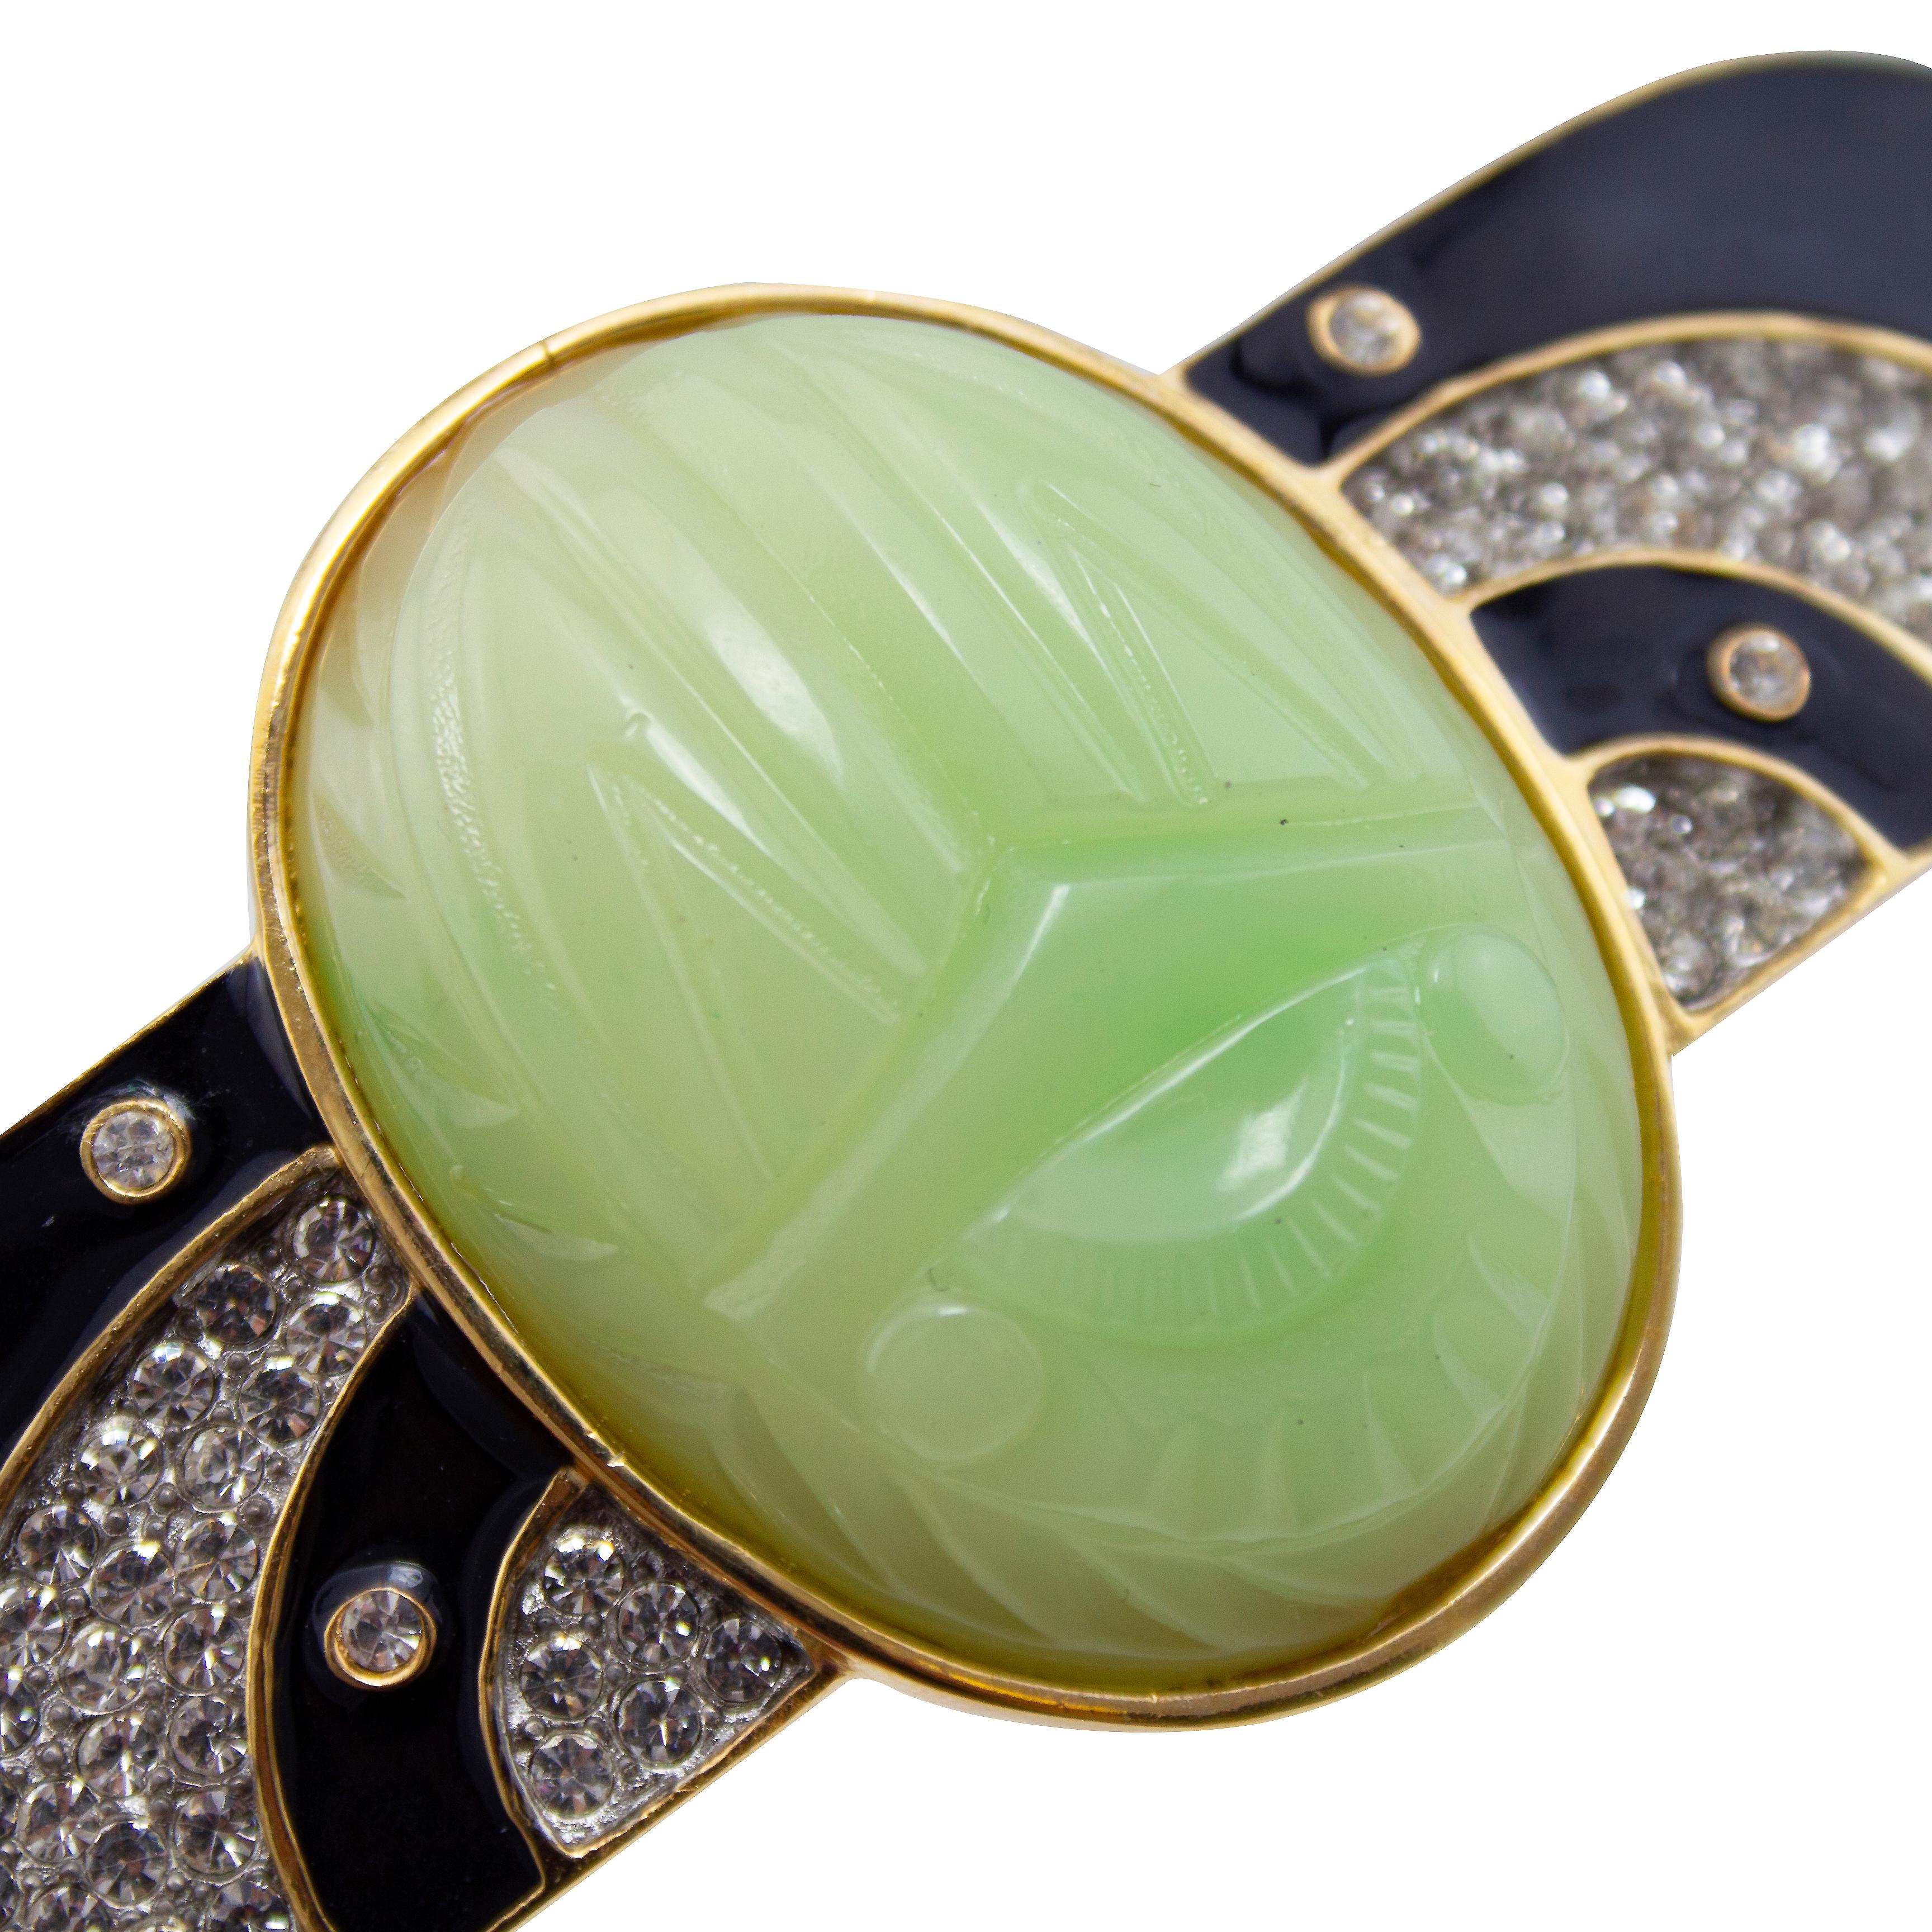 Unique and beautiful Kenneth Jay Lane winged scarab style brooch dating from the 1960s. Art deco style with a large oval shaped carved faux jade centre stone. Wings shaped pieces come out from centre with contrasting black enamel and rhinestones.